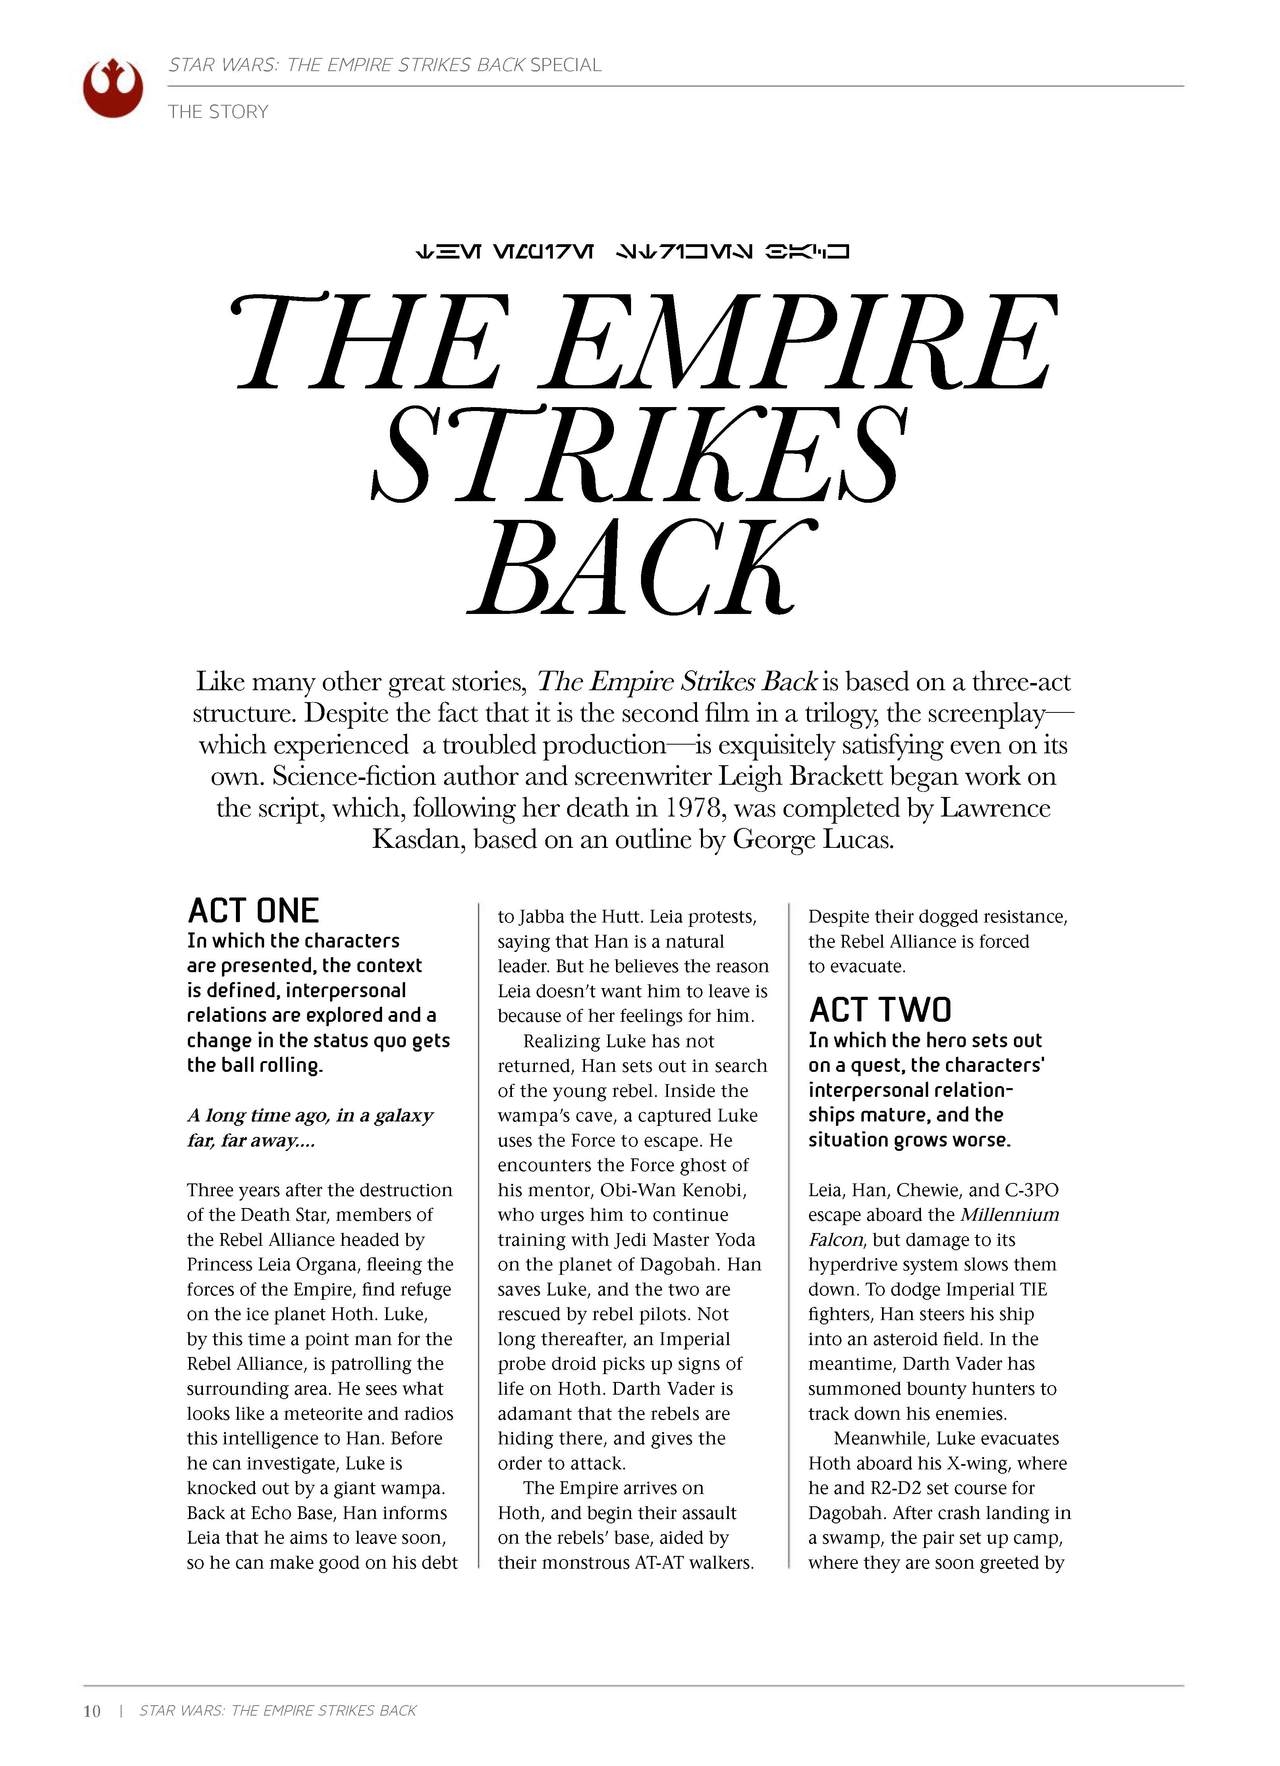 Star Wars - The Empire Strikes Back - The 40th Anniversary Special Edition 11